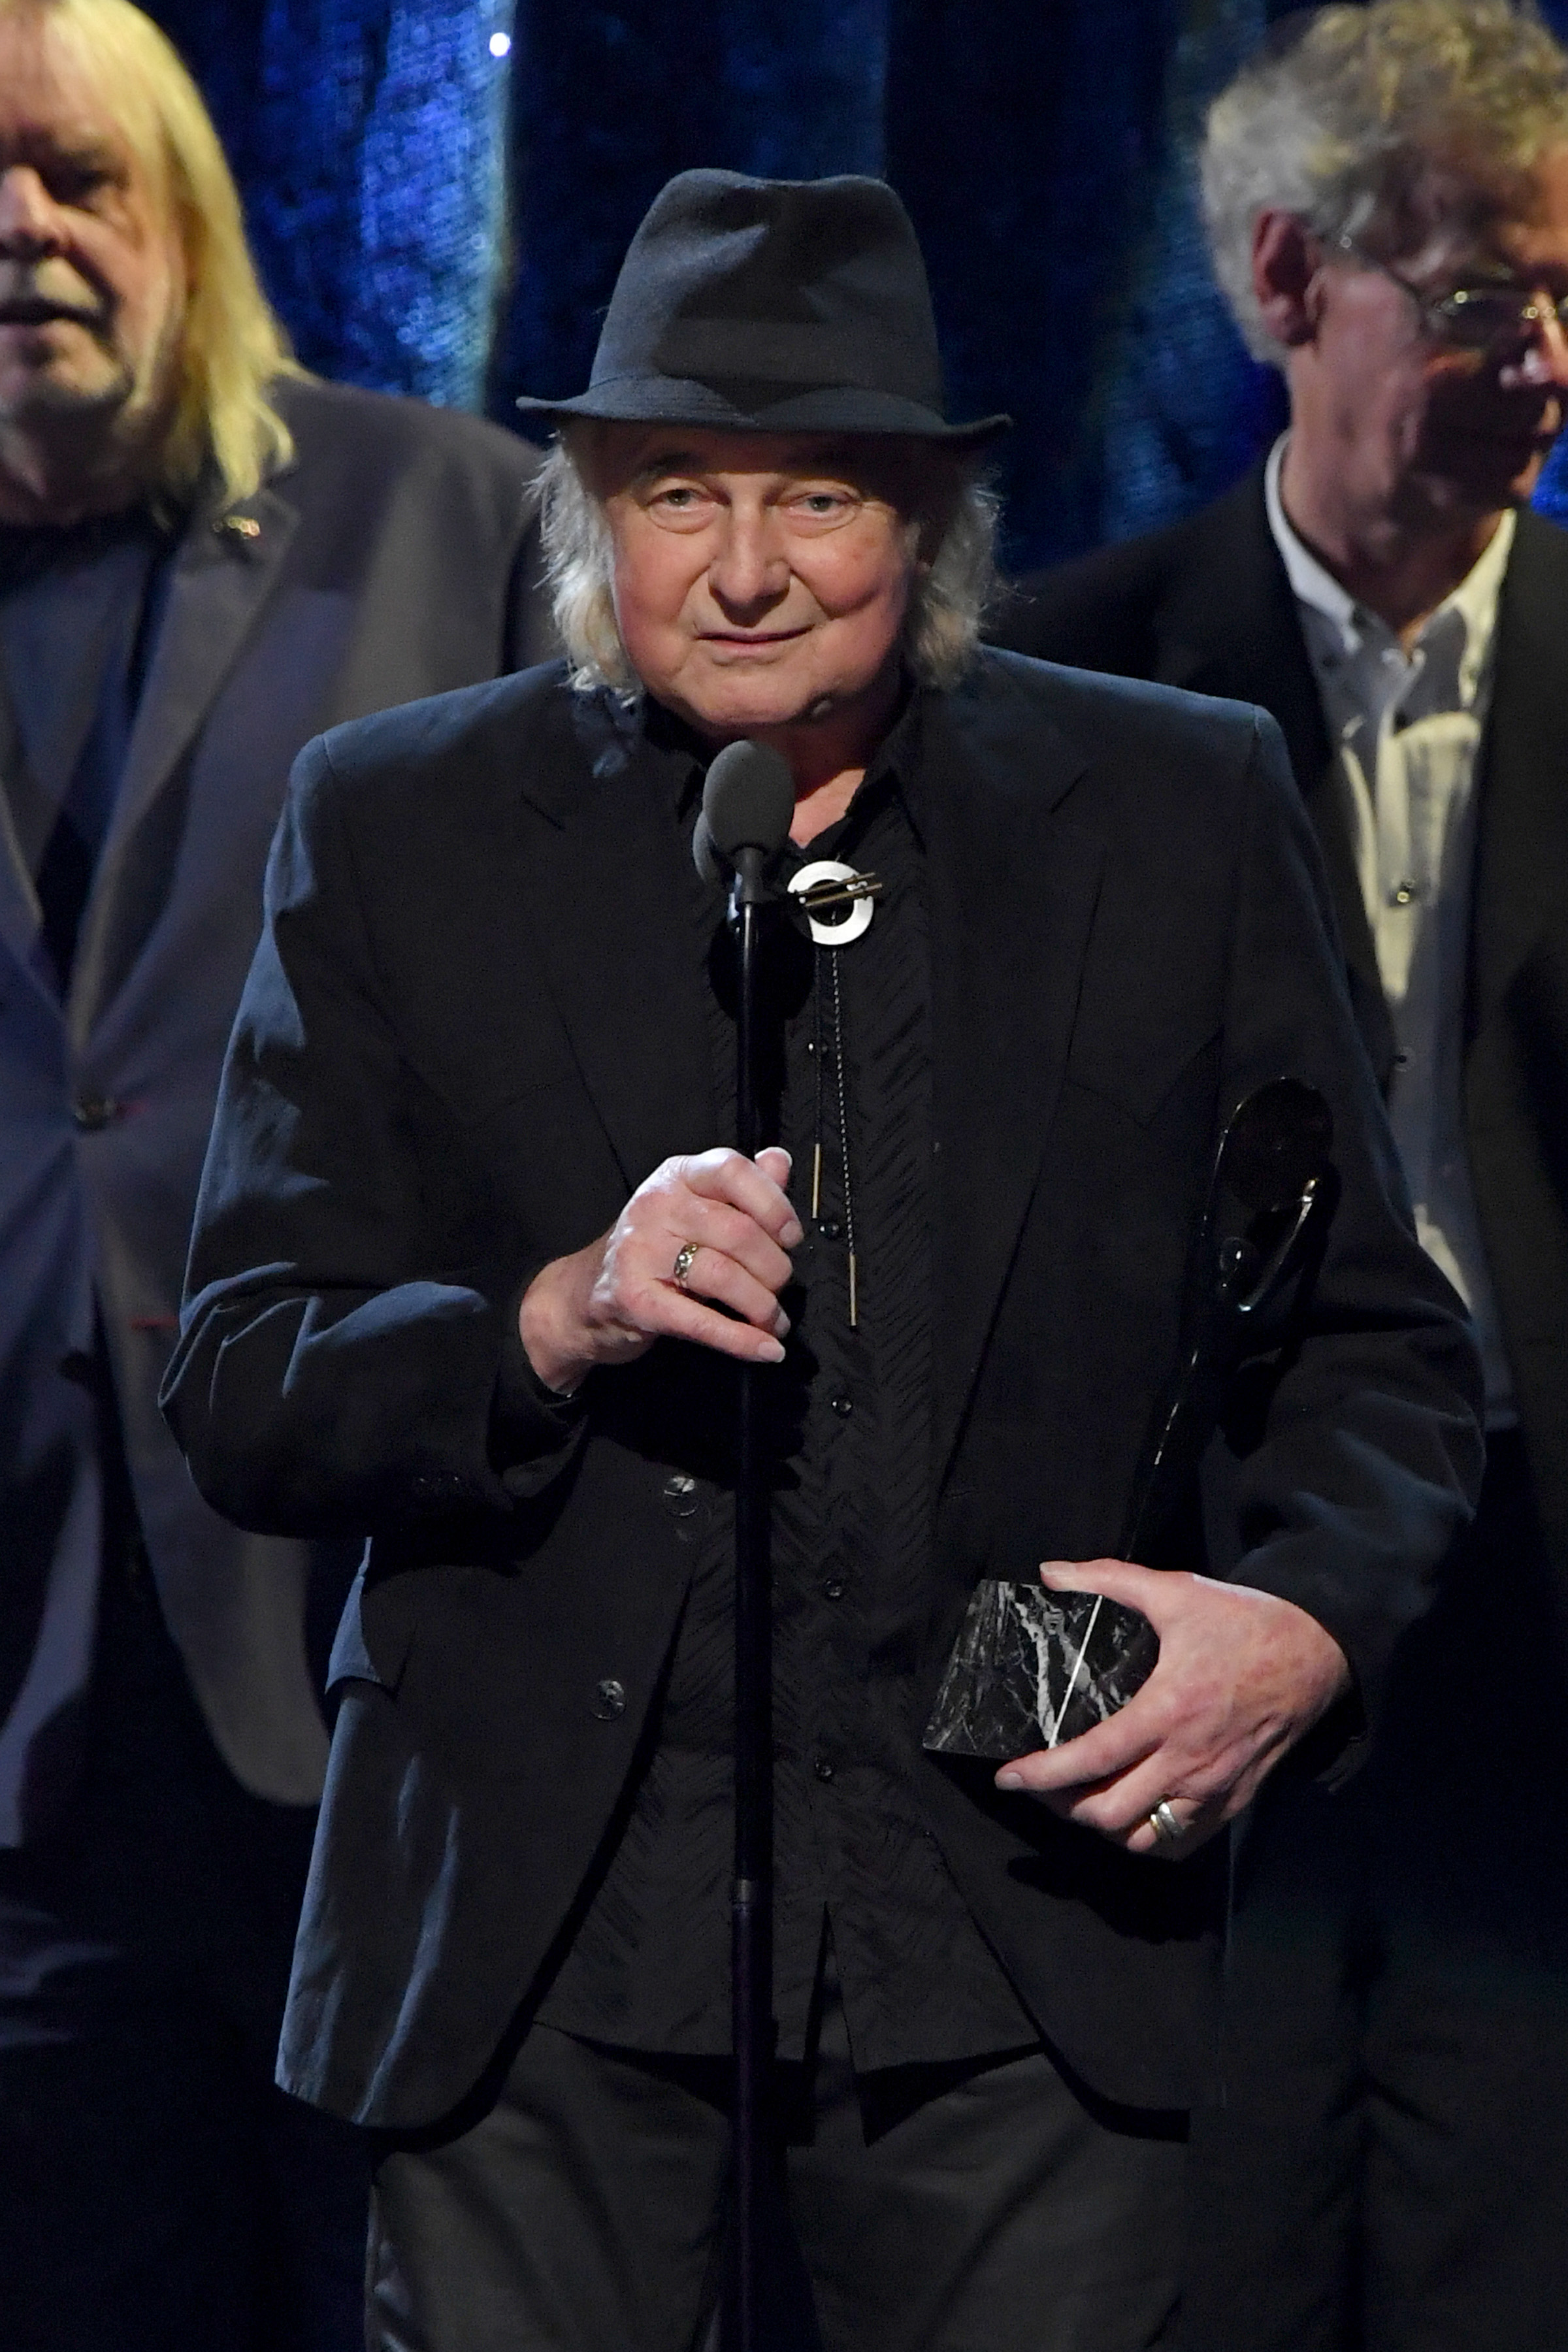 Inductee Alan White of Yes onstage at the 32nd Annual Rock & Roll Hall Of Fame Induction Ceremony in 2017.